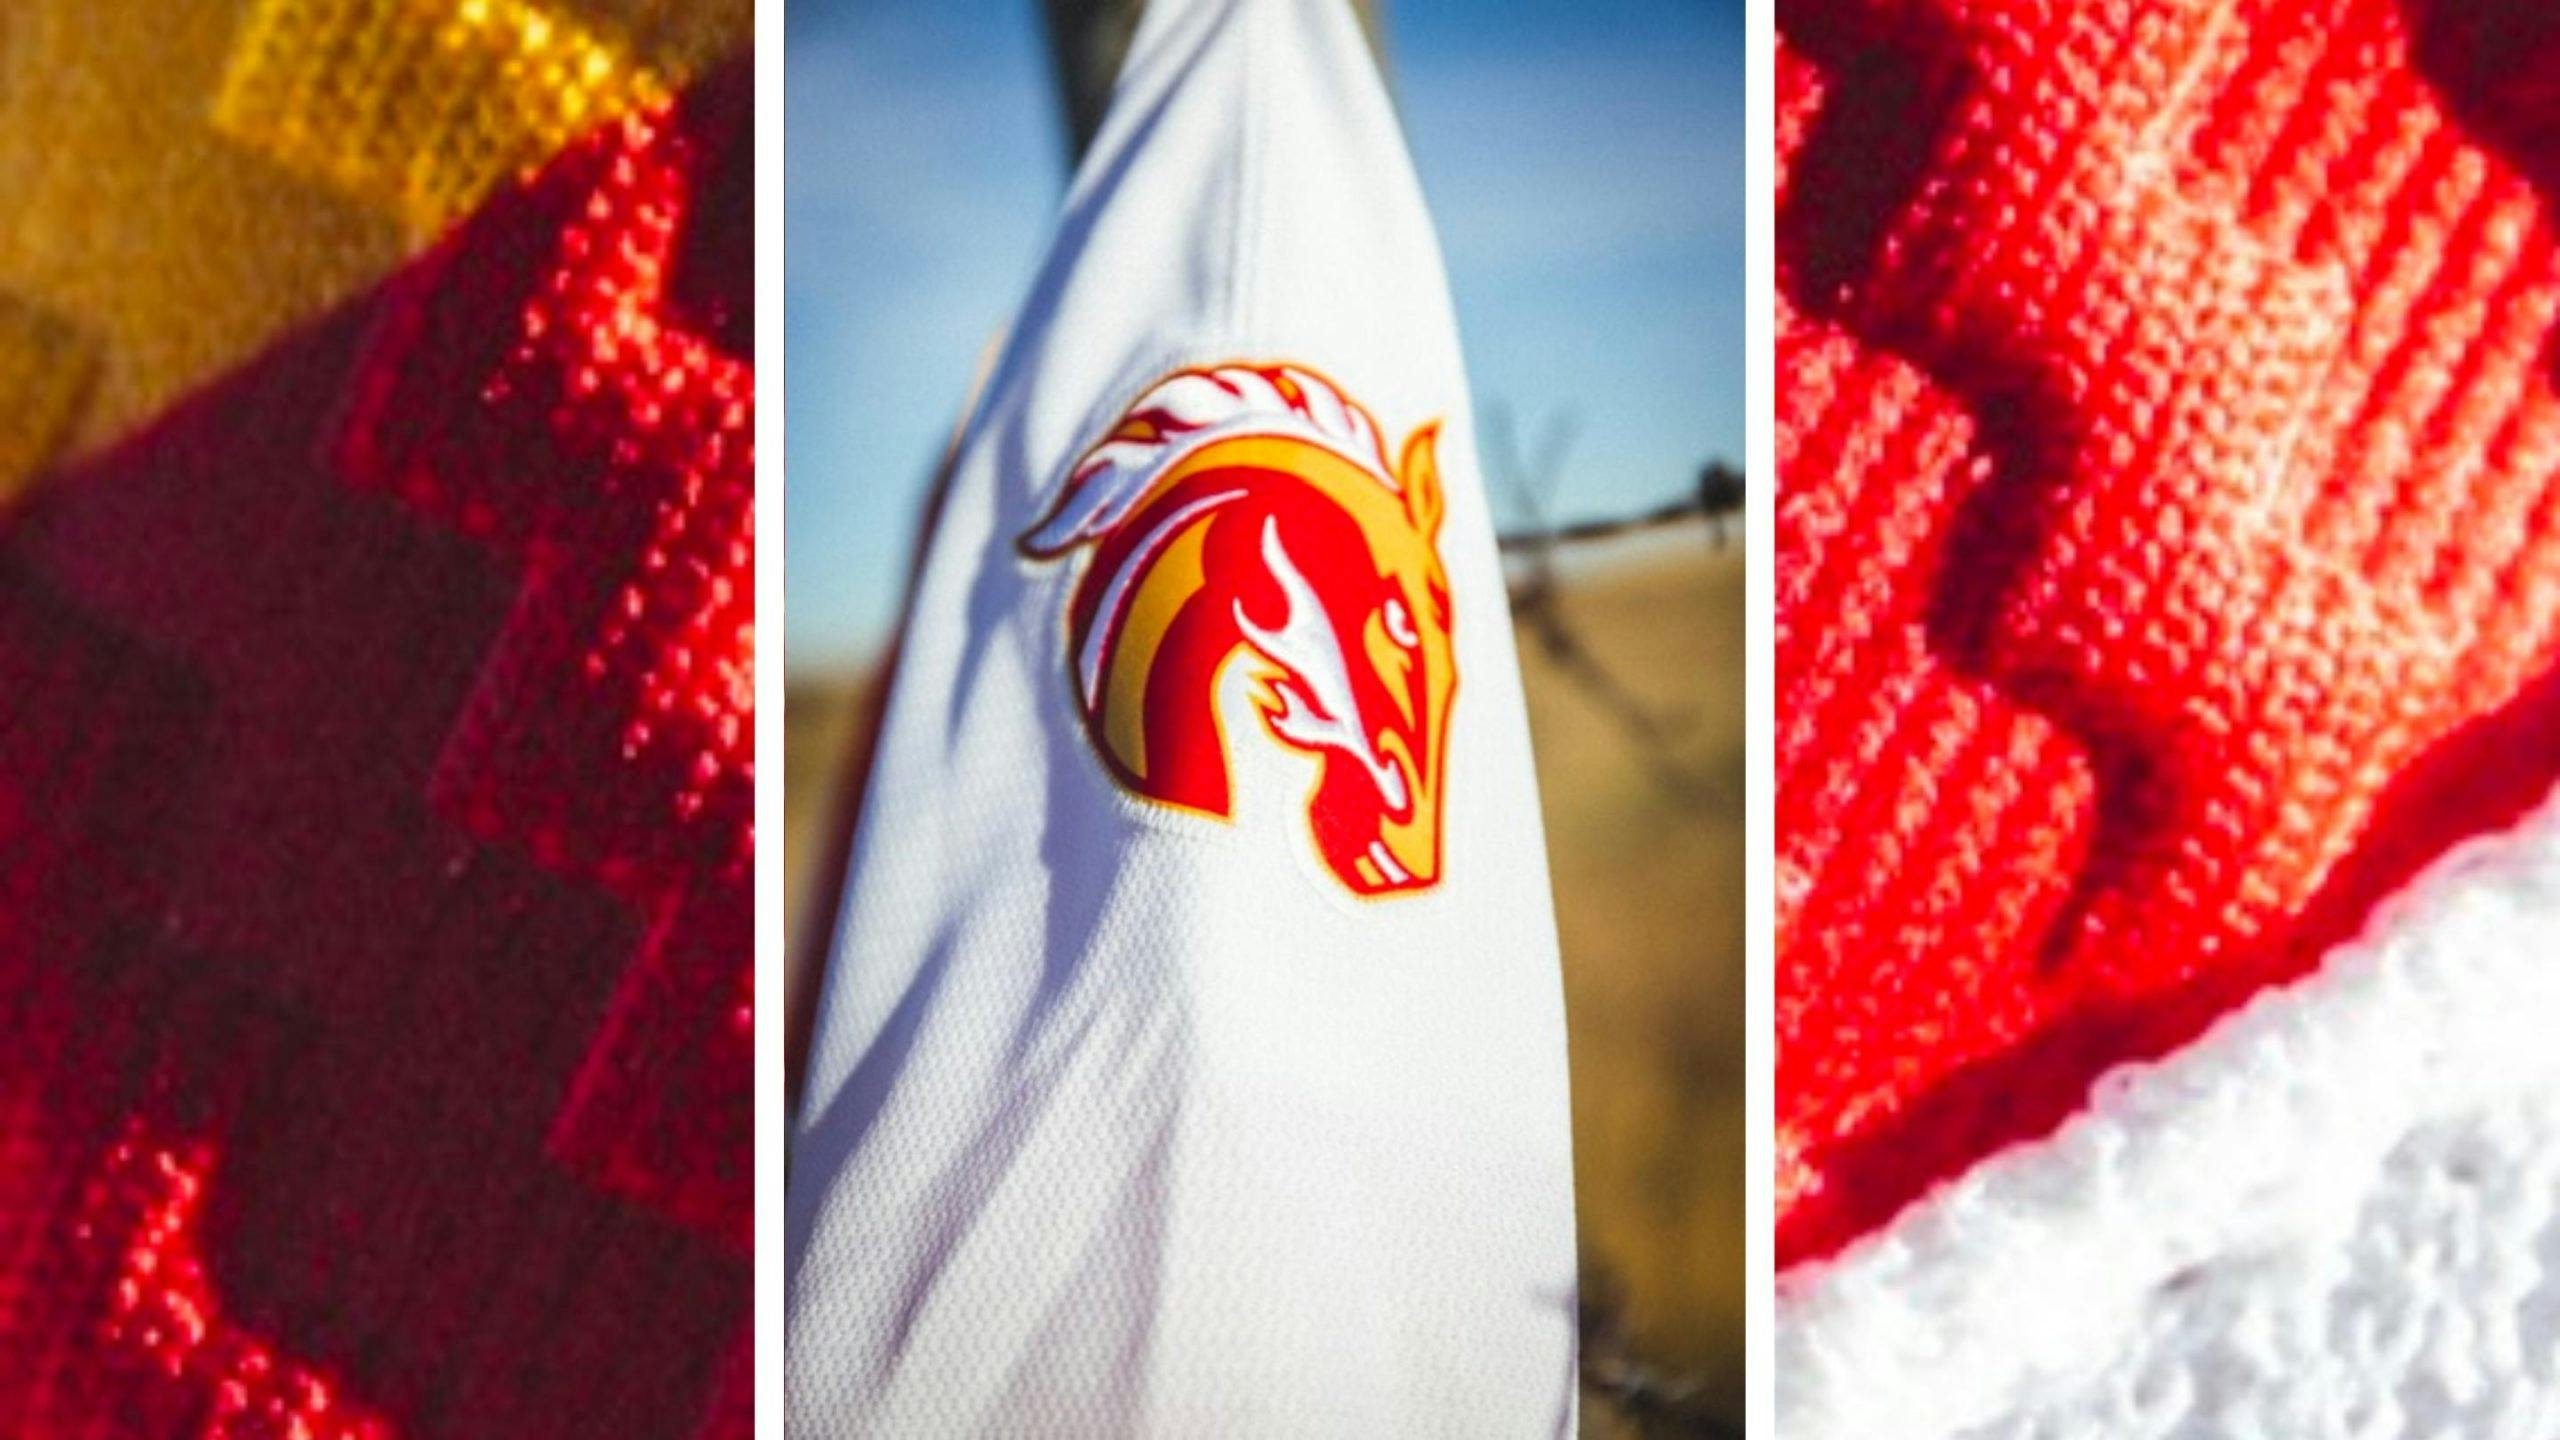 Calgary Wranglers, the Flames' AHL affiliate, unveil inaugural uniforms -  FlamesNation